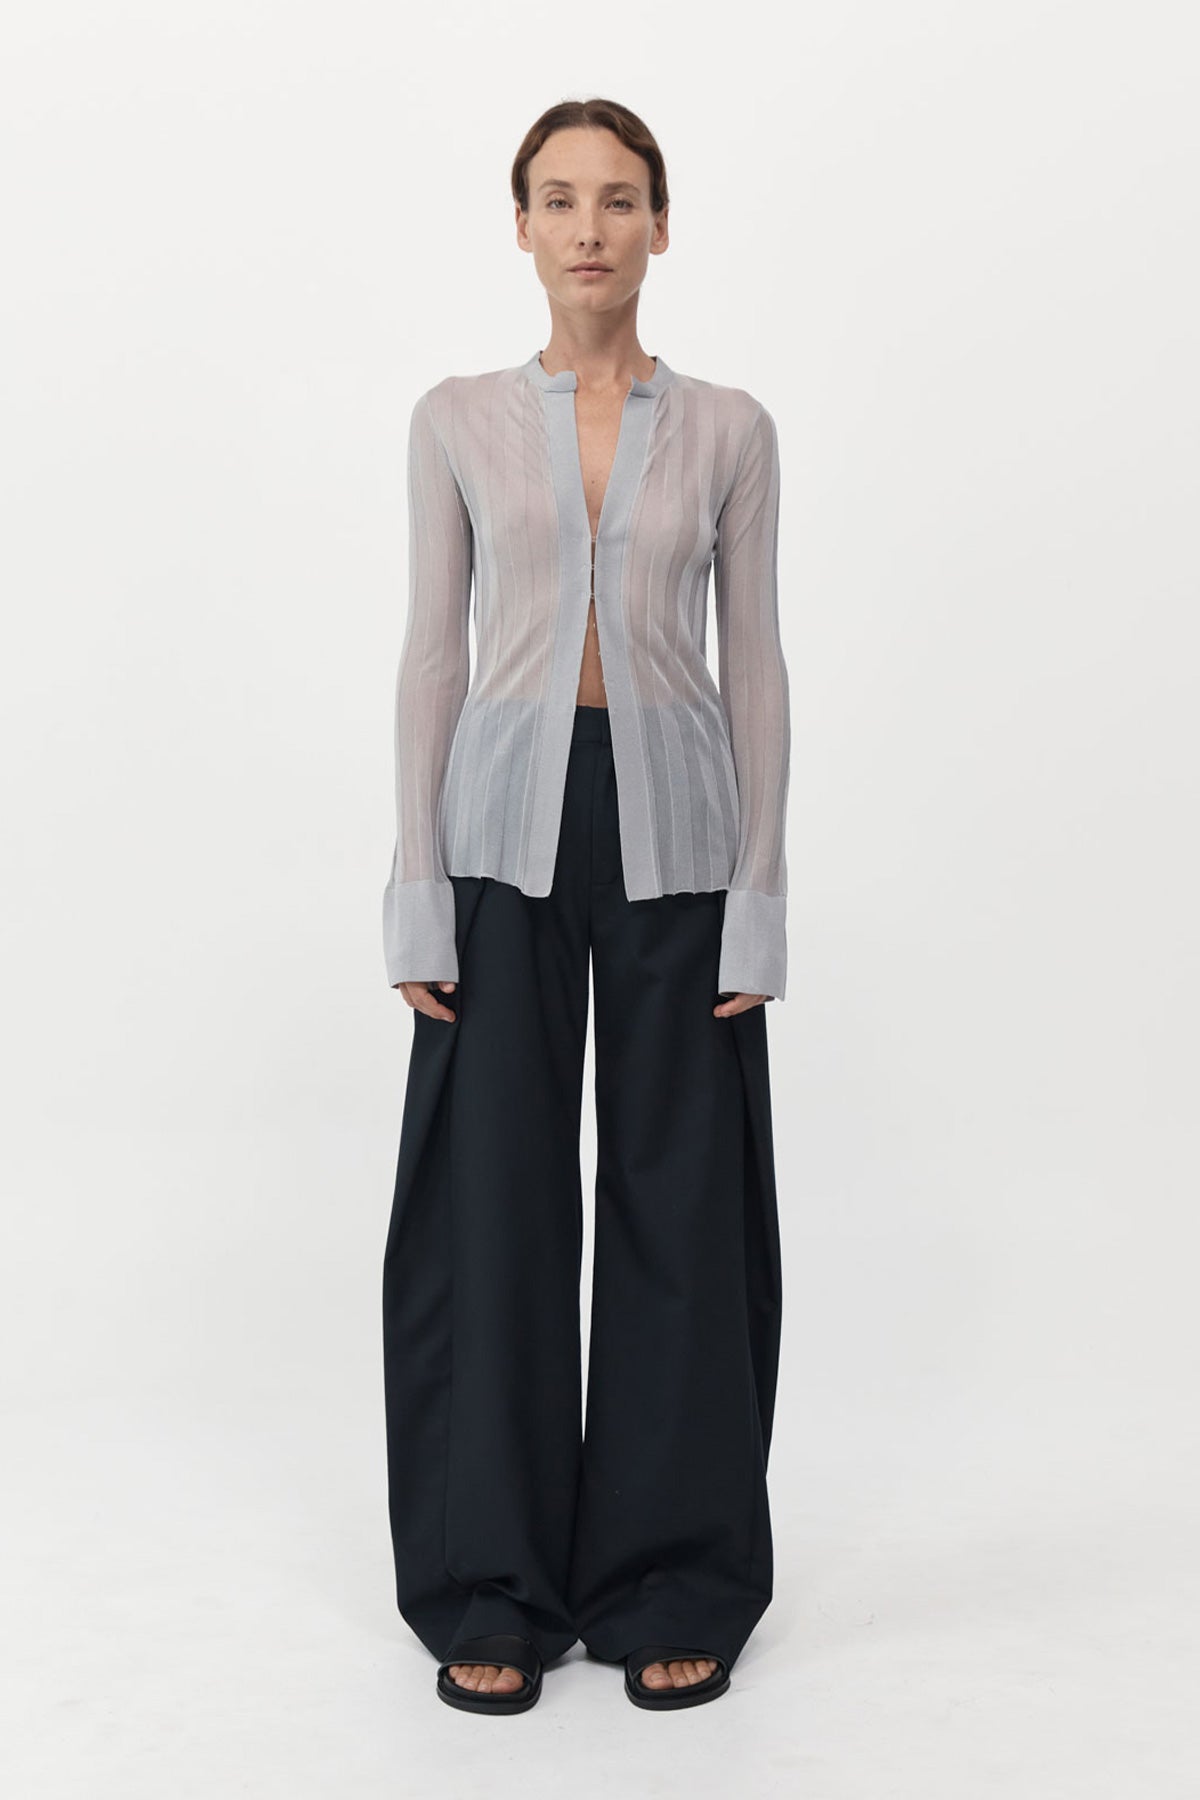 St Agni Fine Pleat Knit Shirt in Silver available at TNT The New Trend Australia